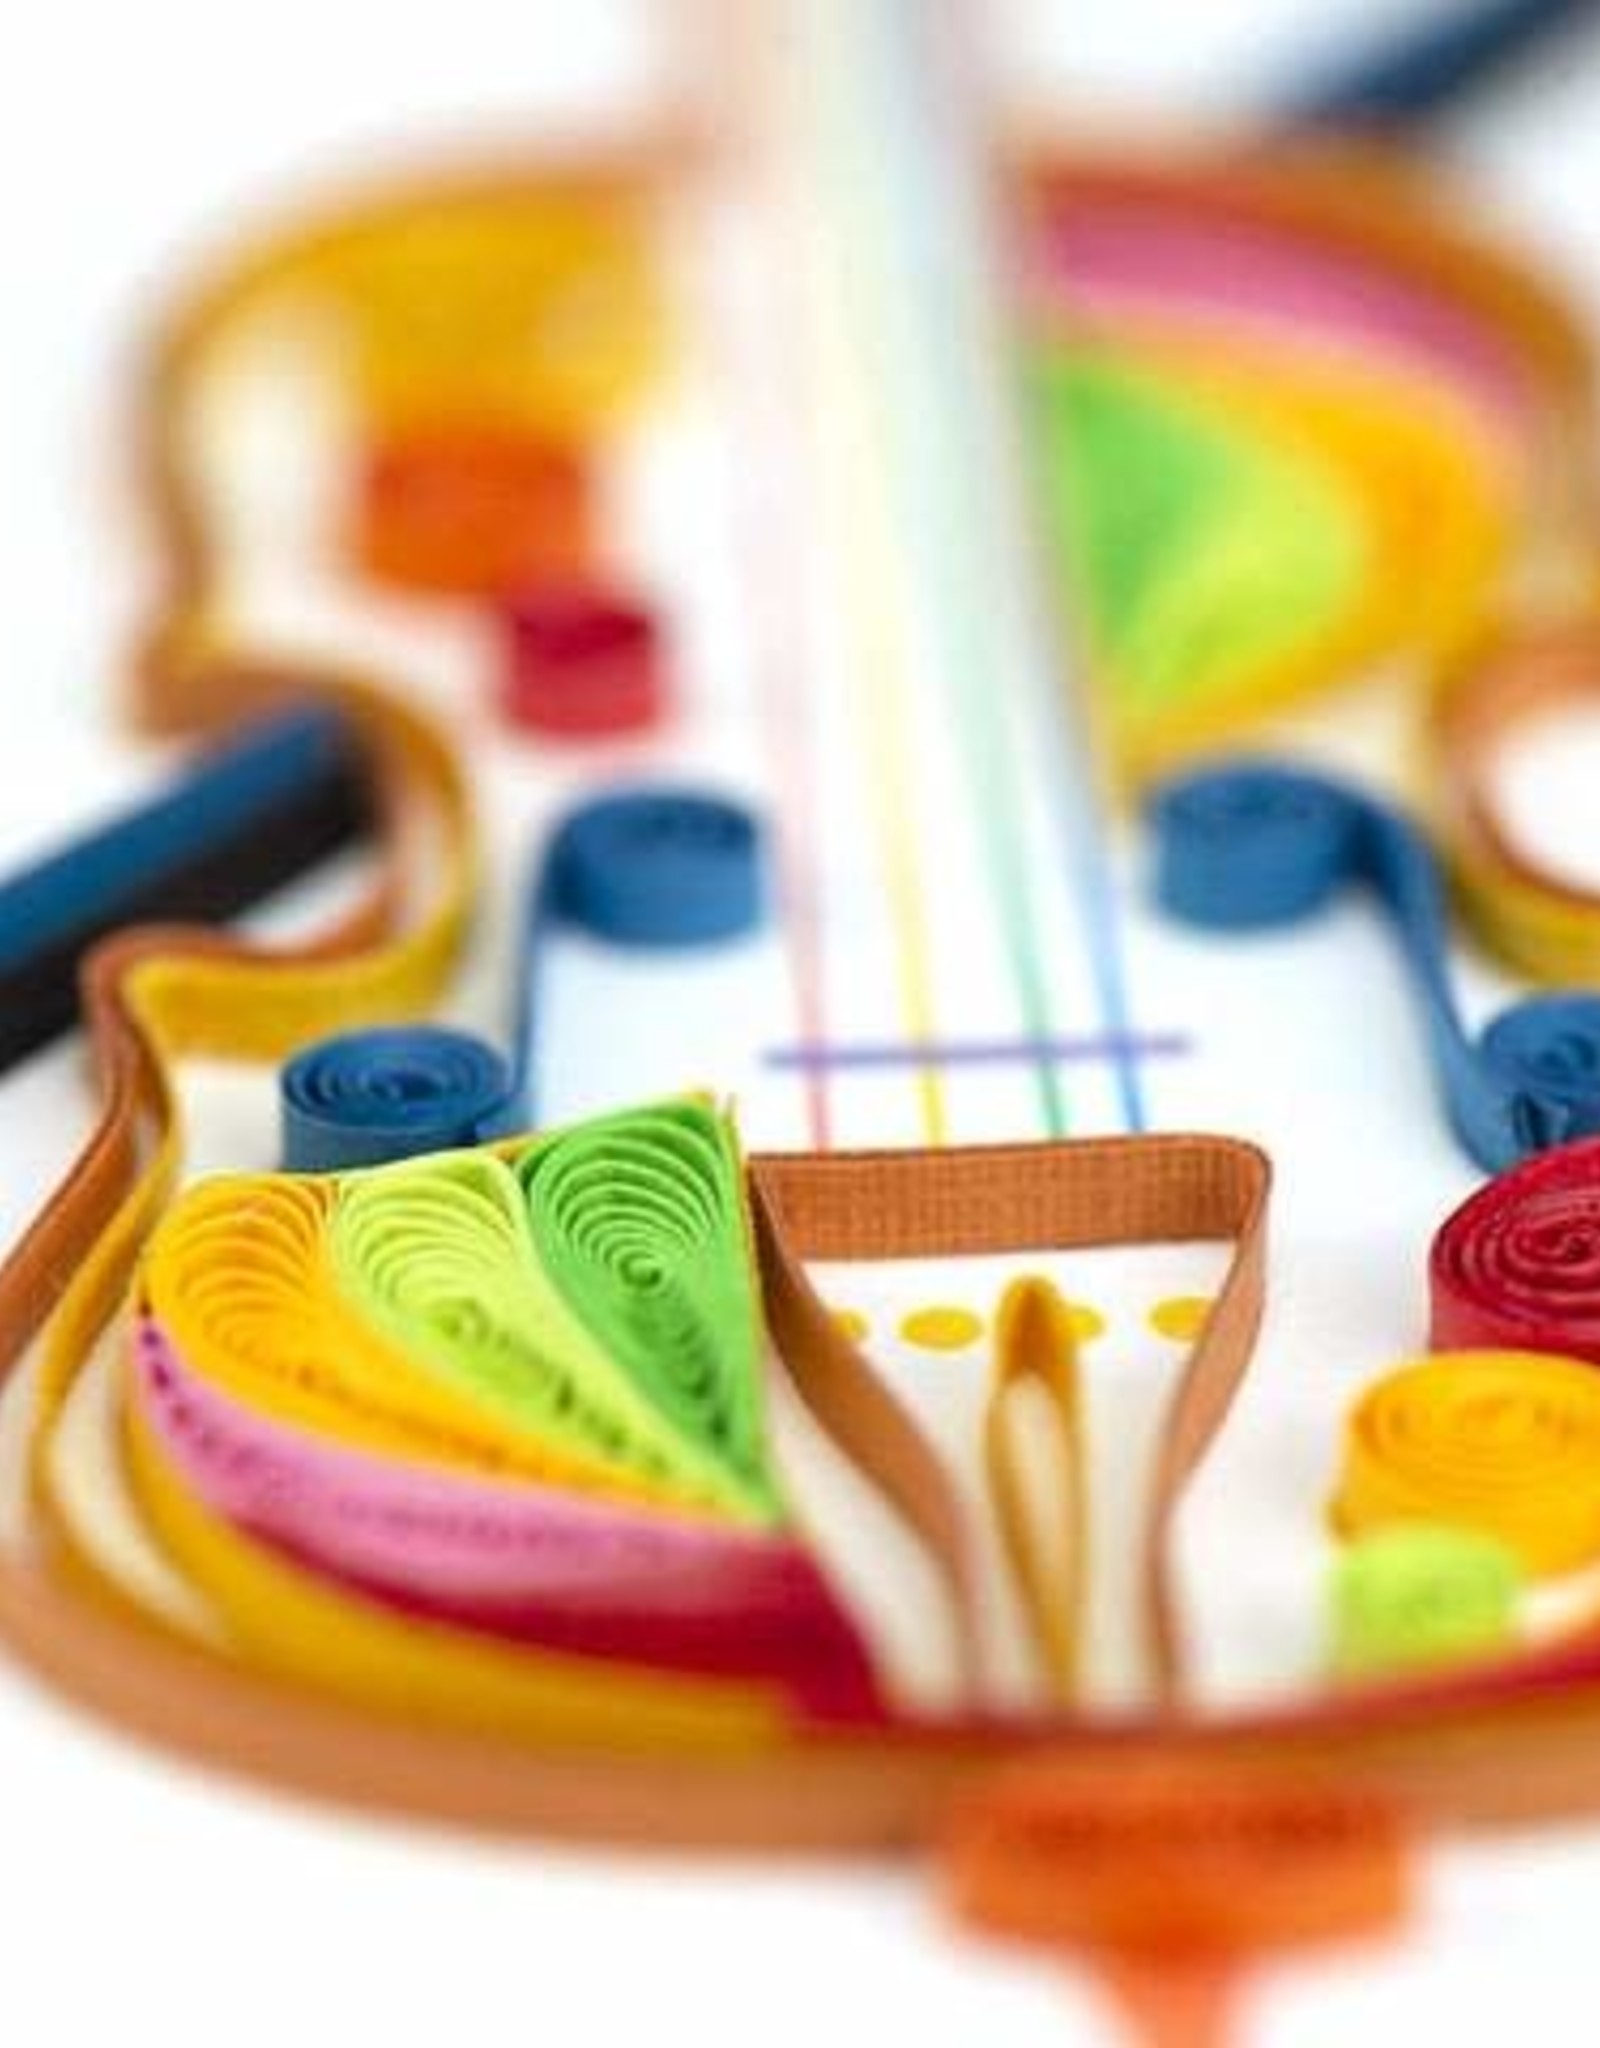 Quilling Card Quilled Cello Greeting Card